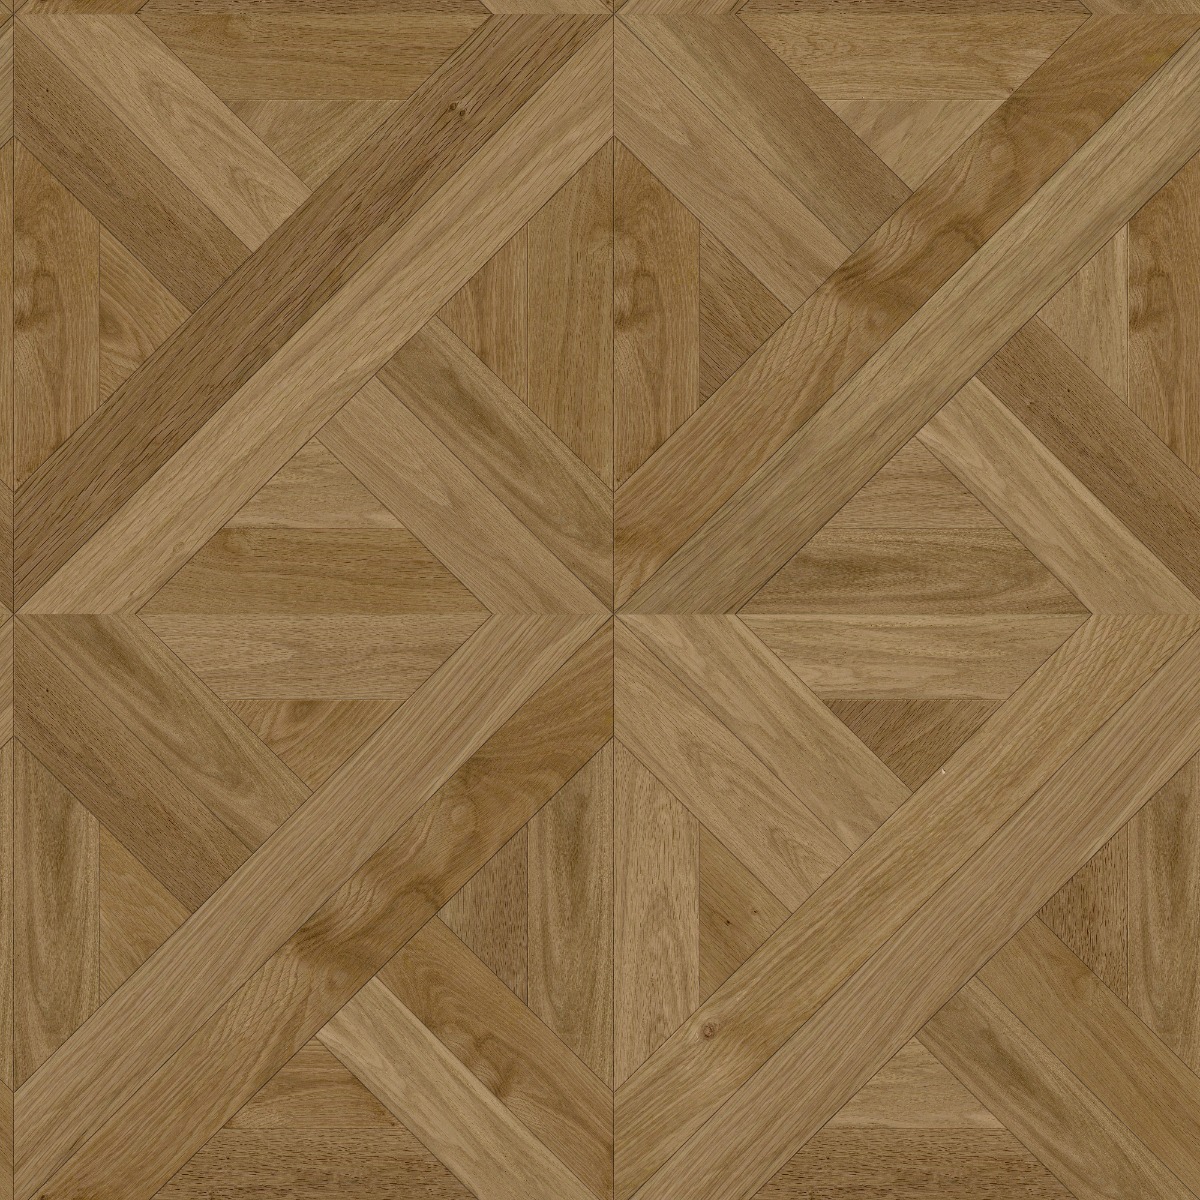 A seamless wood texture with expressive 152 boards arranged in a Versailles pattern